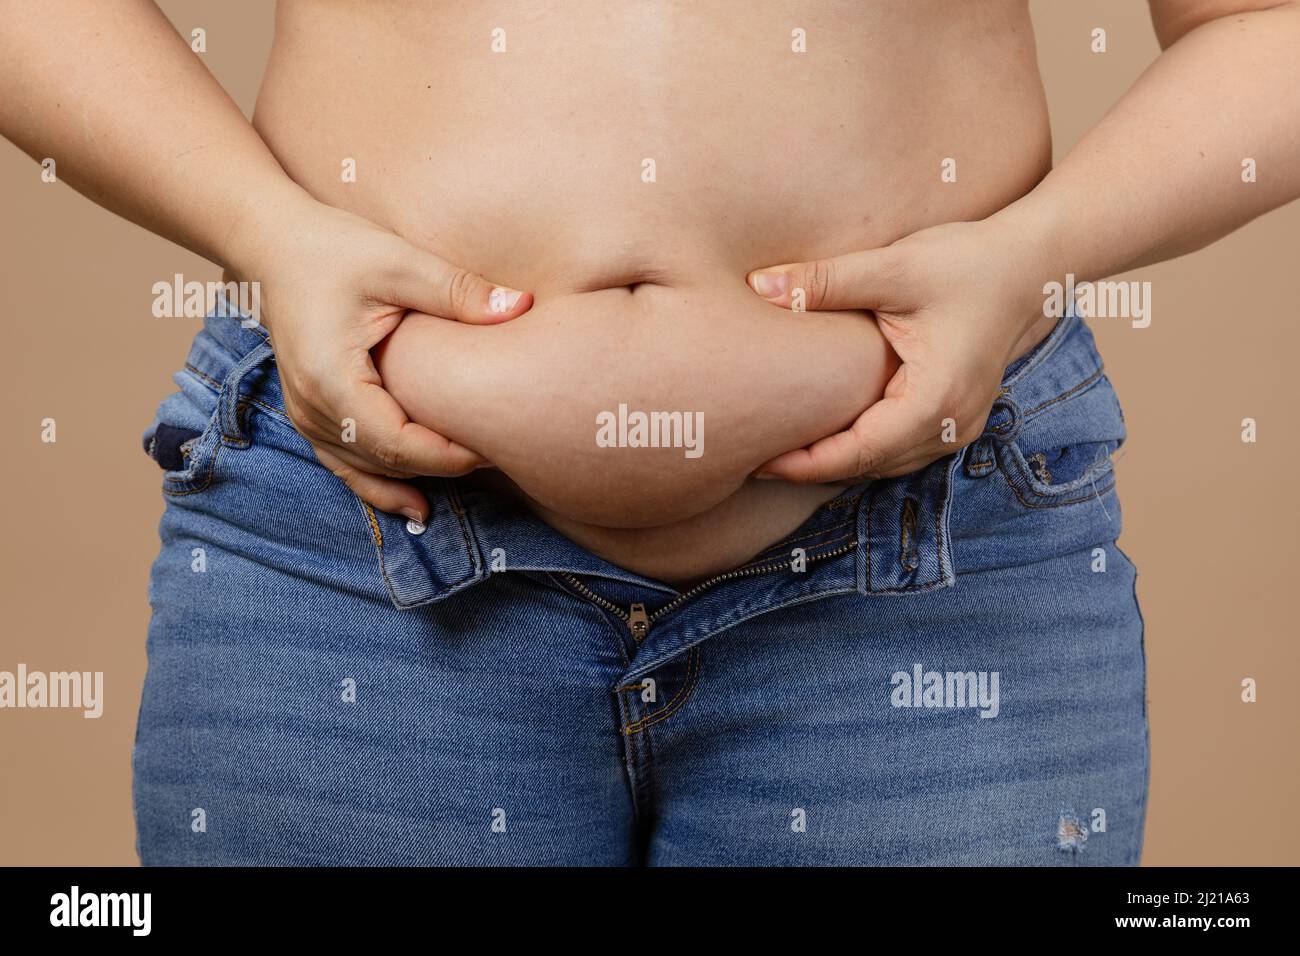 Caucasian obese Woman touching and showing big tummy wearing blue unzipped jeans on beige background. Sudden weight gain. Visceral fat. Body positive Stock Photo